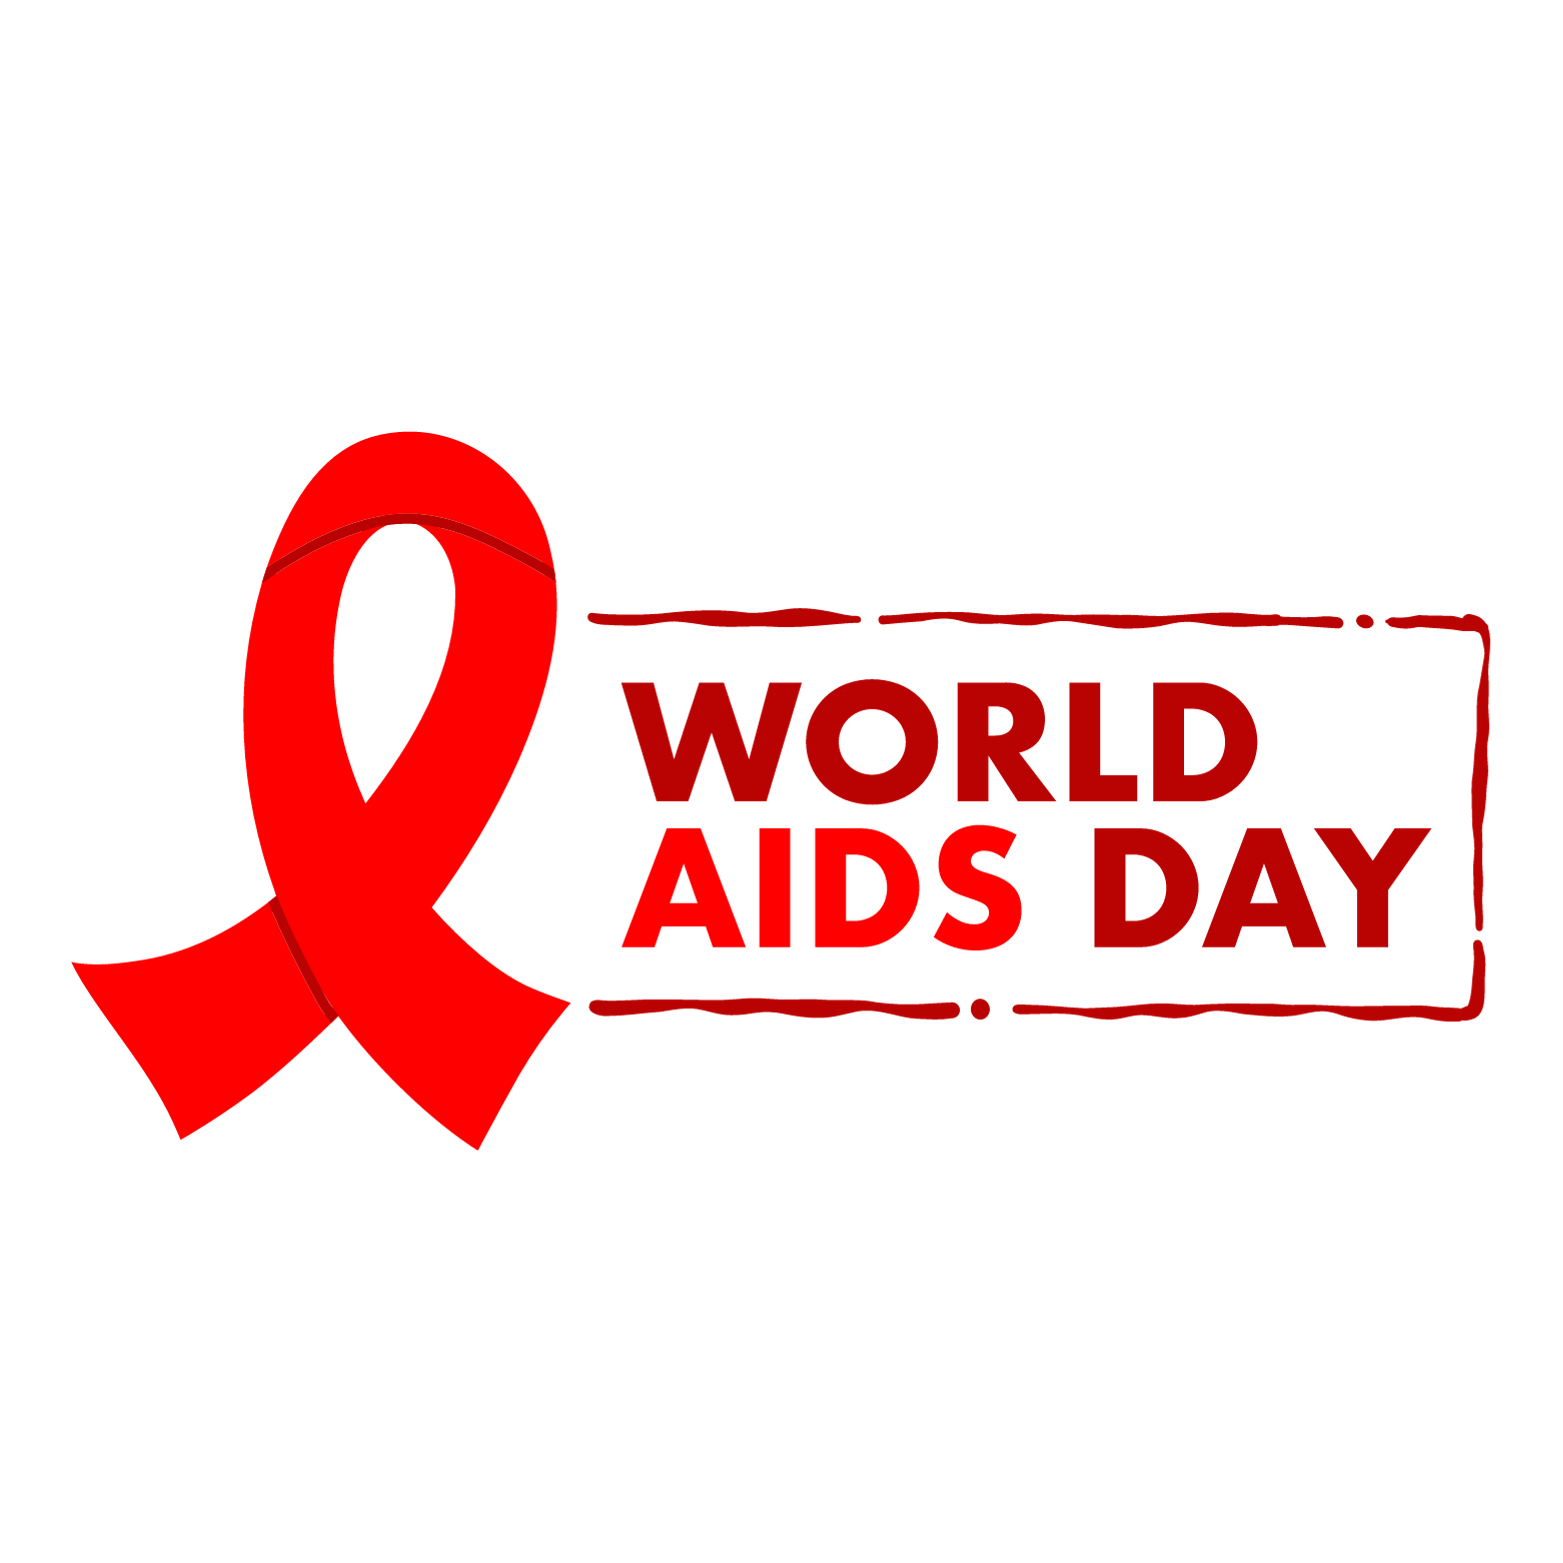 Today is the 35th World AIDS Day